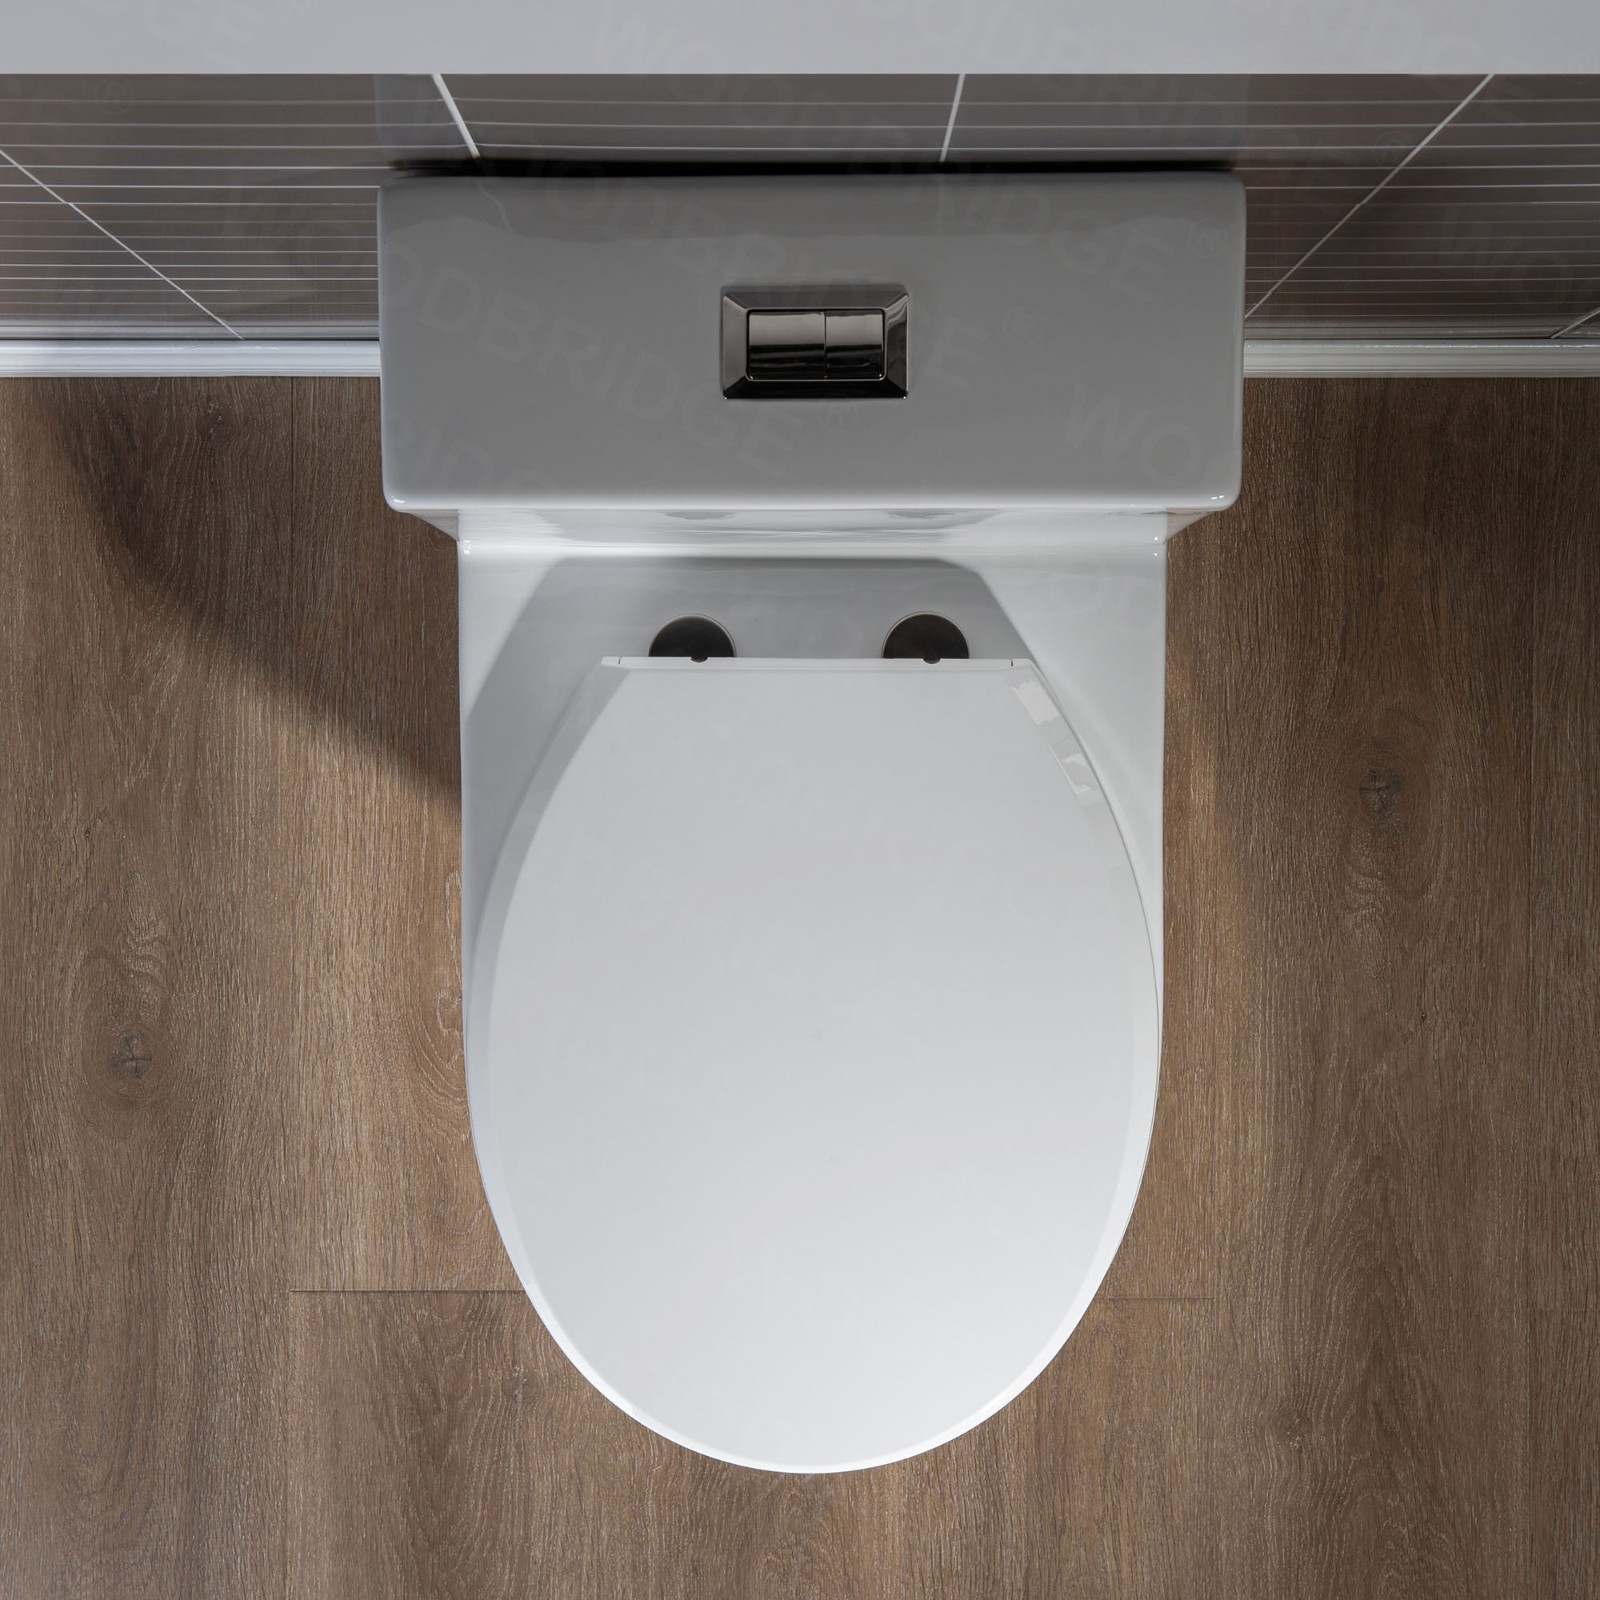  WOODBRIDGE One Piece Short Compact Bathroom Tiny Mini Commode Water Closet Dual Flush Concealed Trapway, Brushed Nickel Button B0500-B/N, White_5679